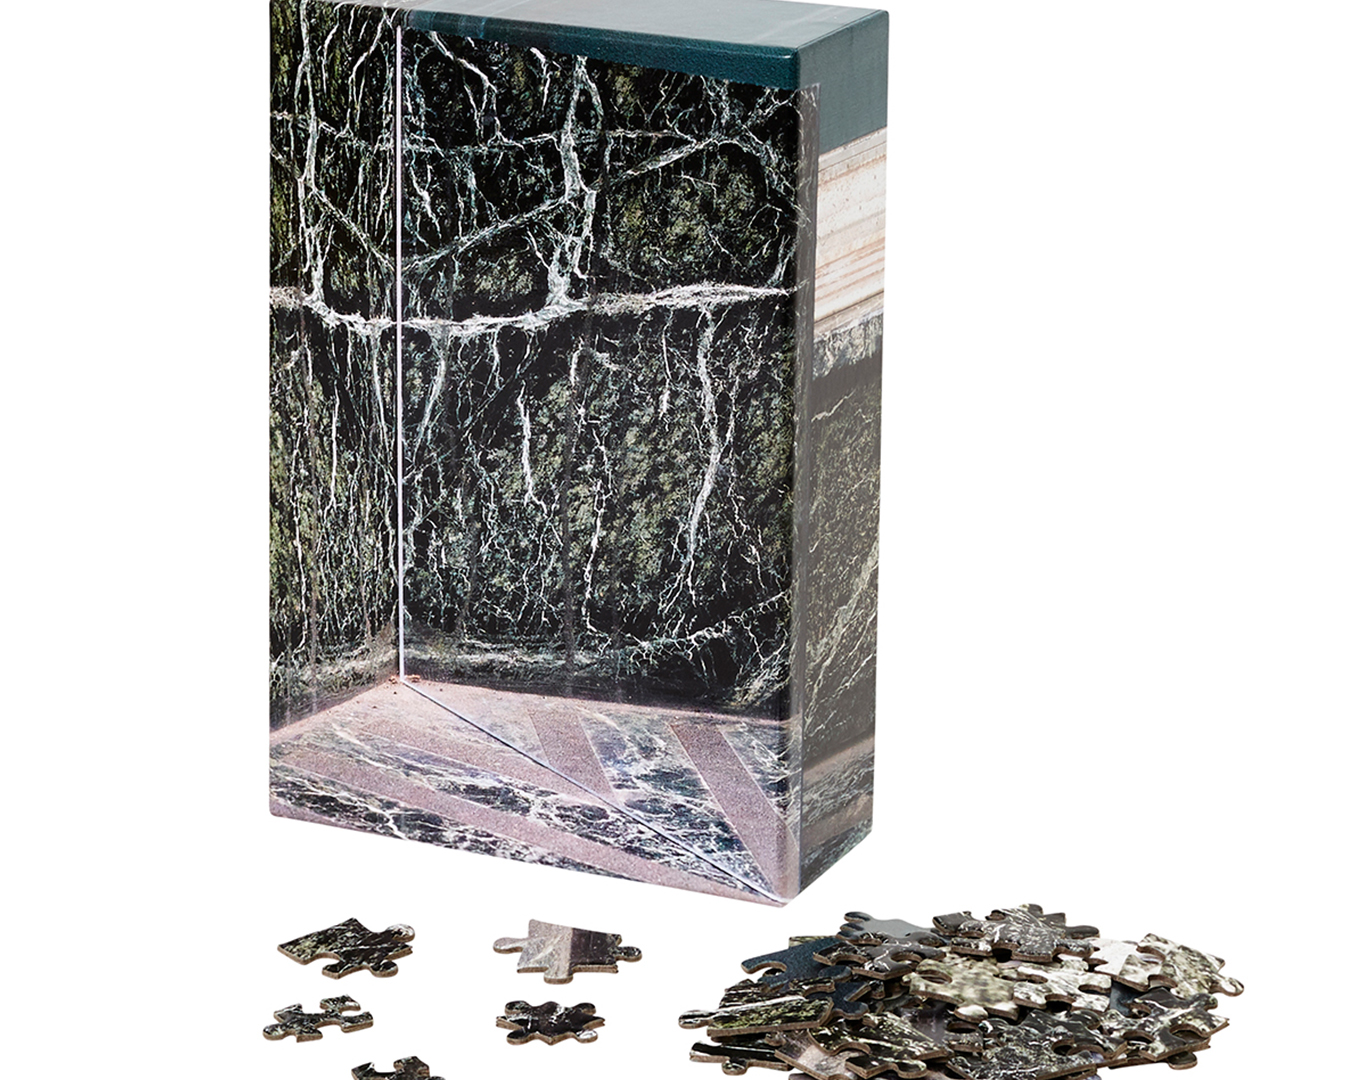 Puzzle box featuring grey, marble pattern. In front of it are a few single puzzle pieces.